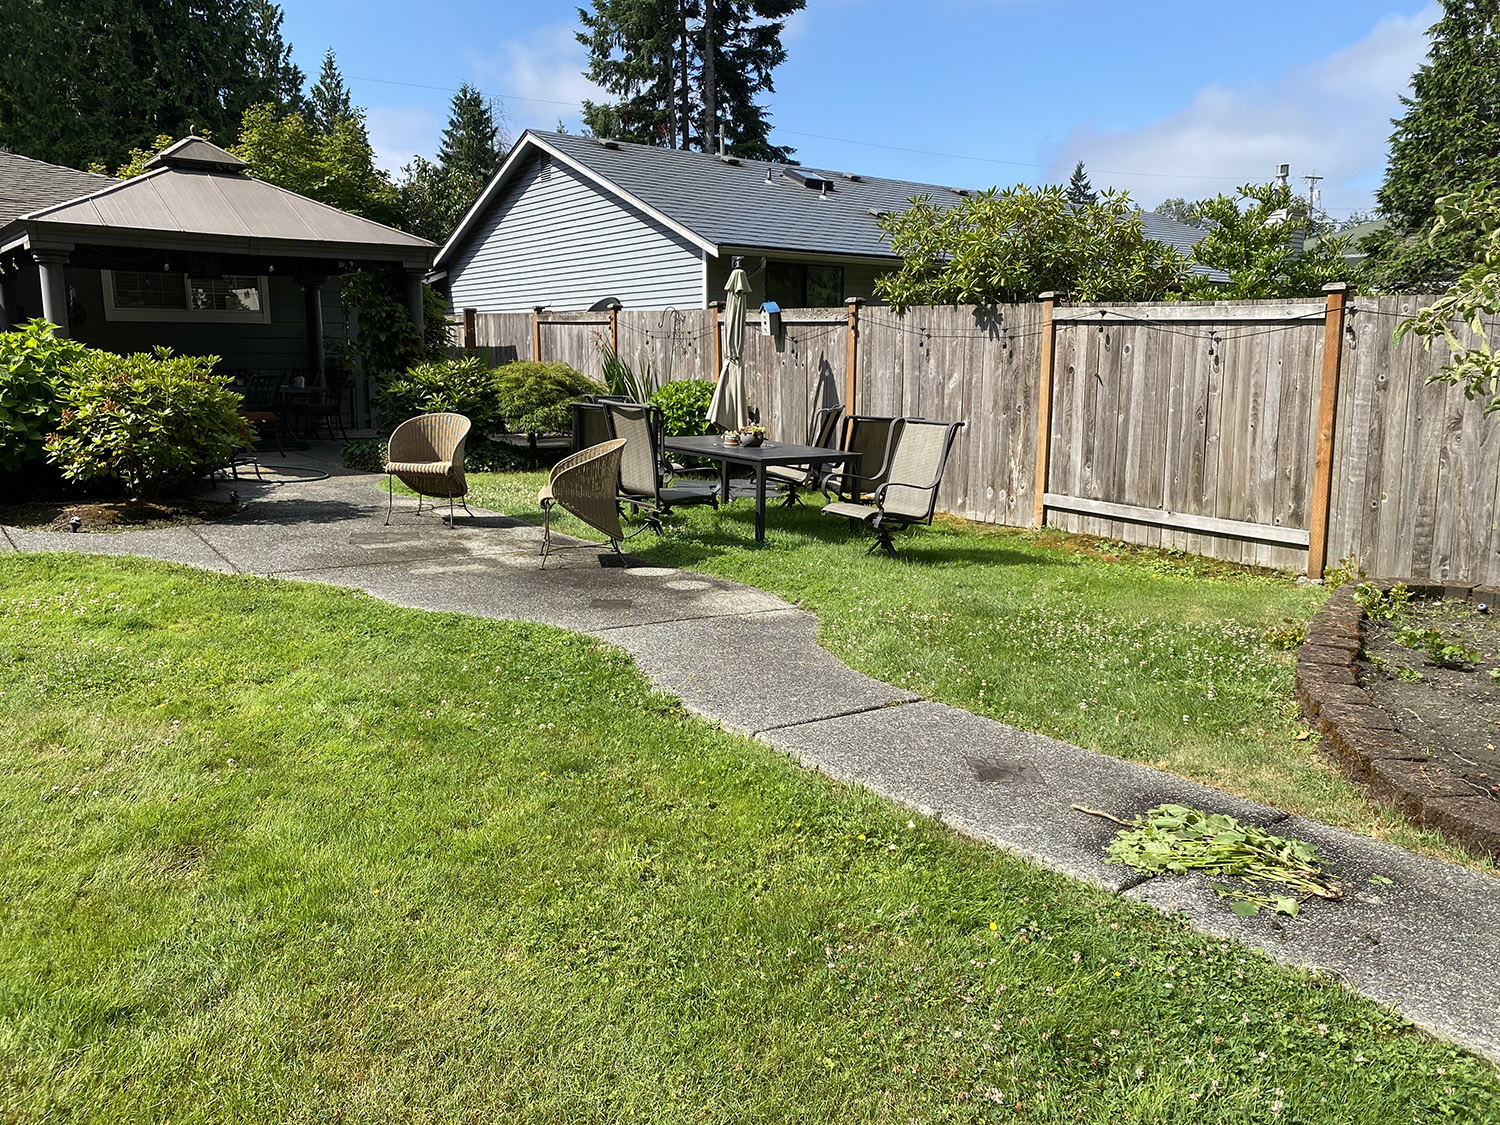 Photo of a yard with clover, deck furniture, and a walkway.